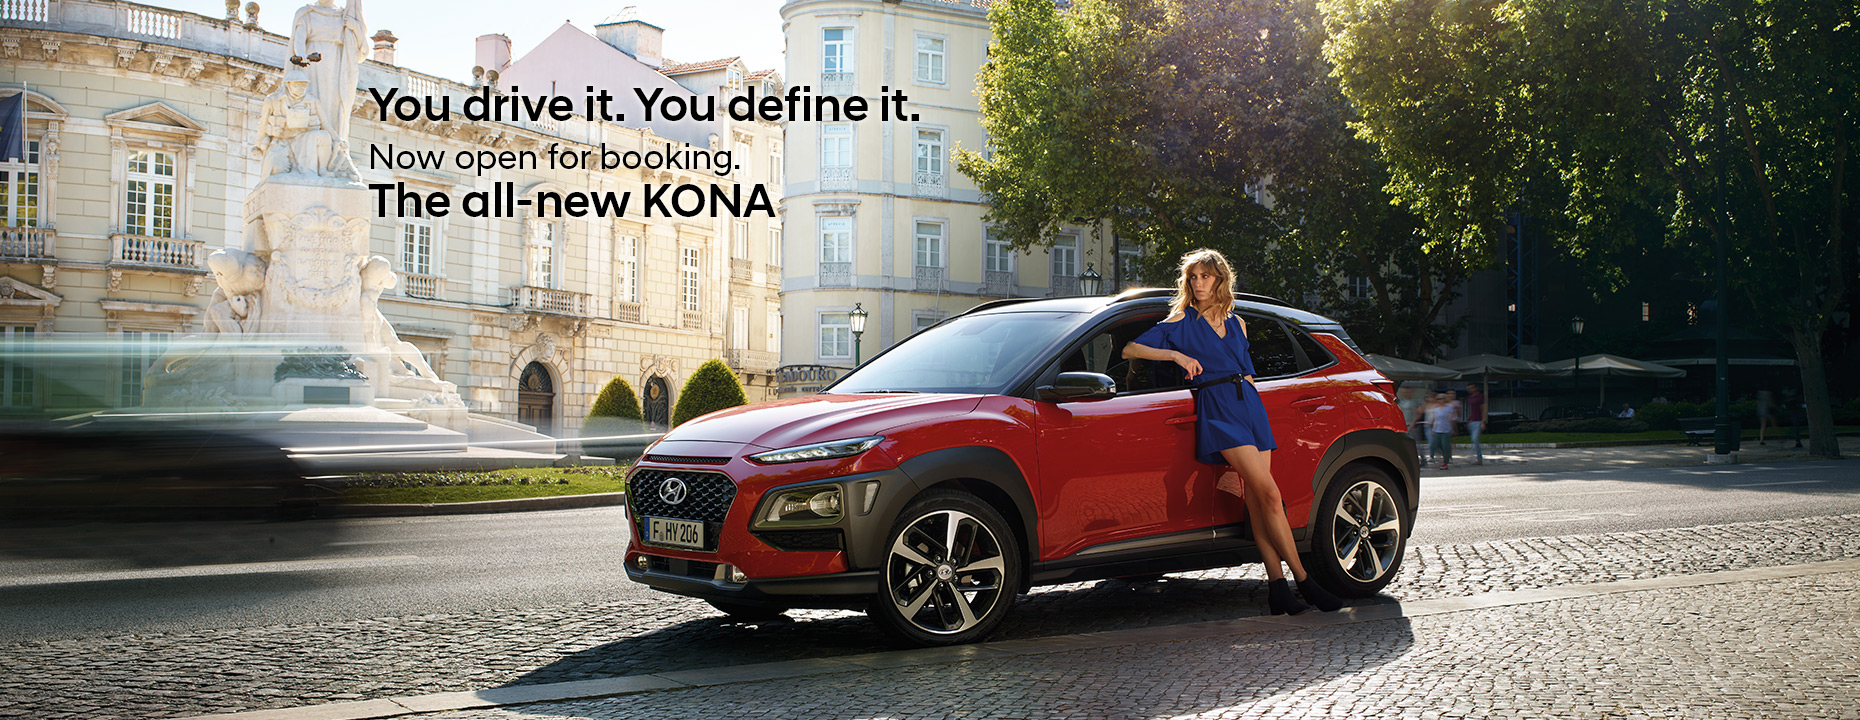 The all-new Kona - Coming Soon